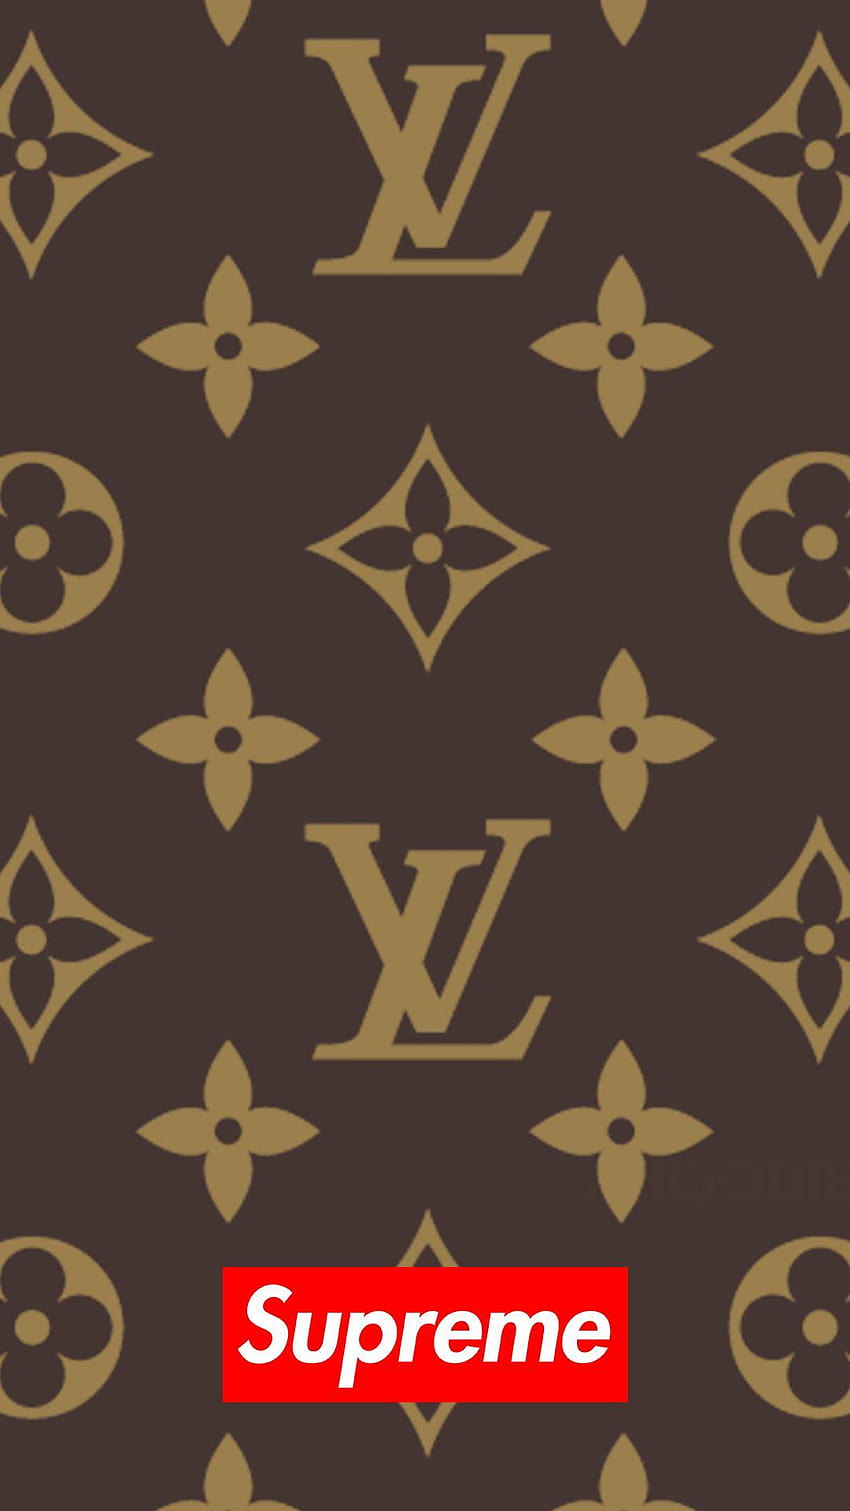 LV neon wallpaper  Neon wallpaper, Cool wallpapers for phones